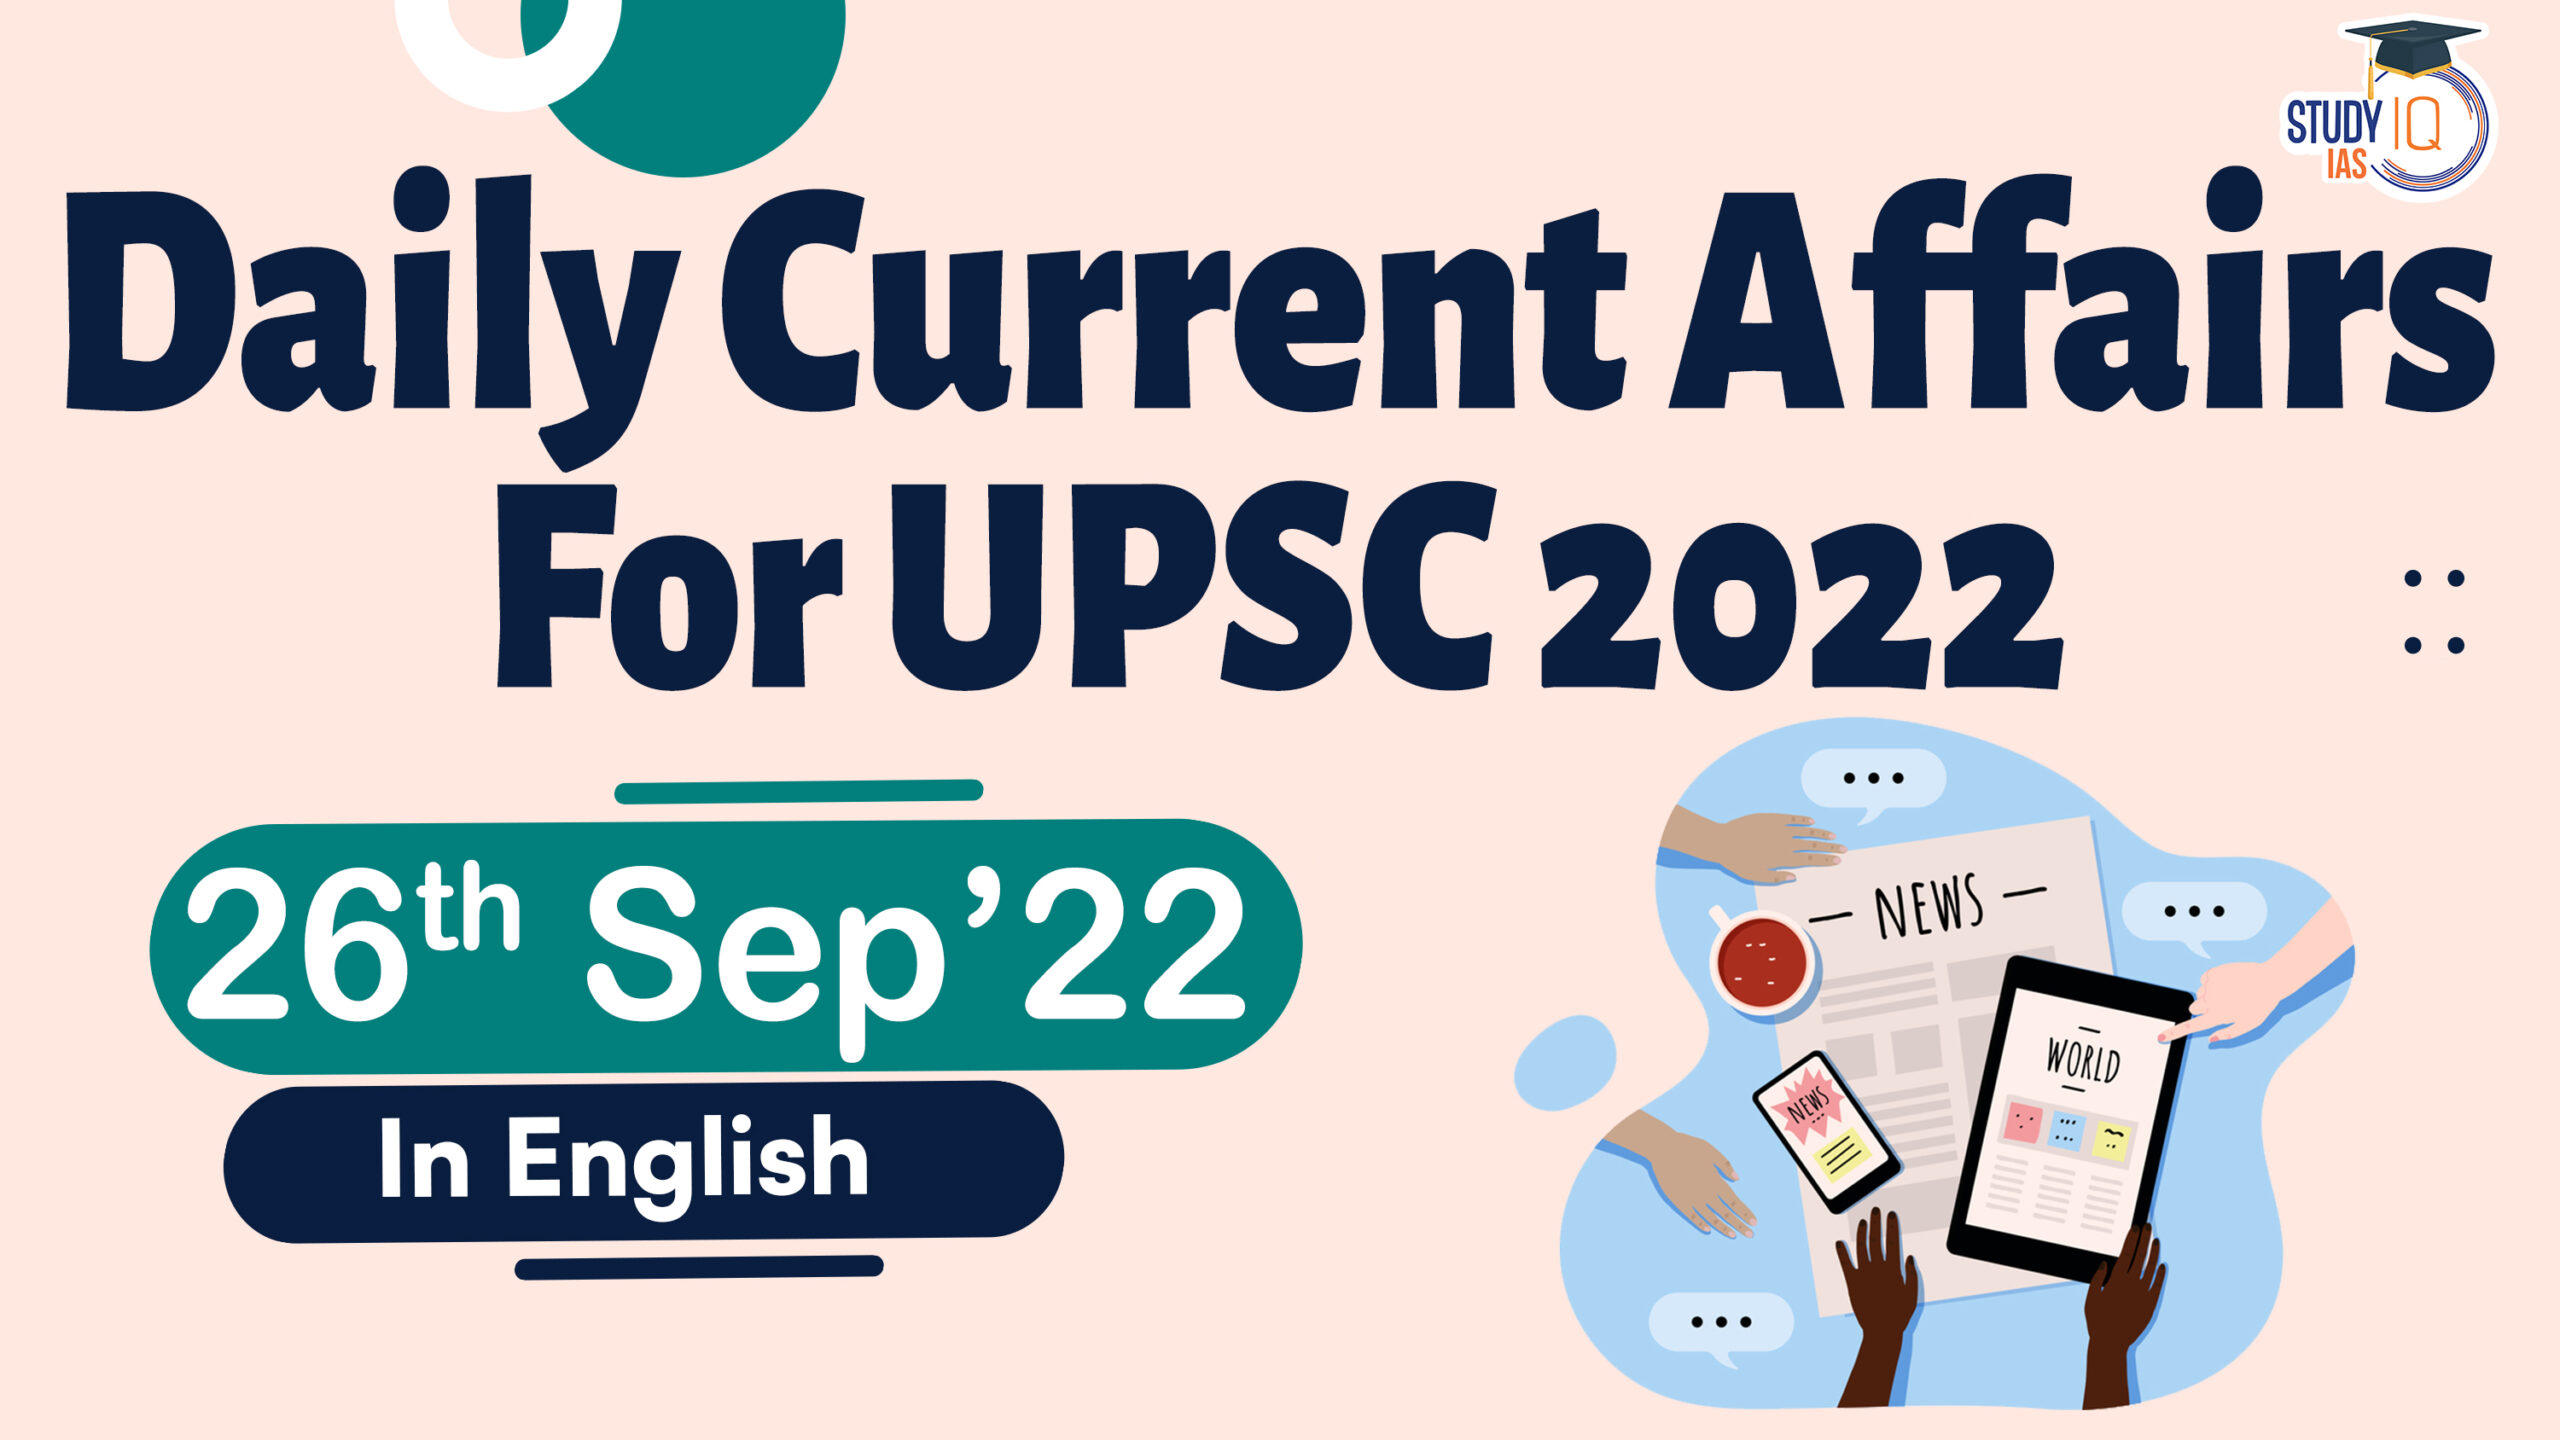 Daily Current Affairs for UPSC 2022